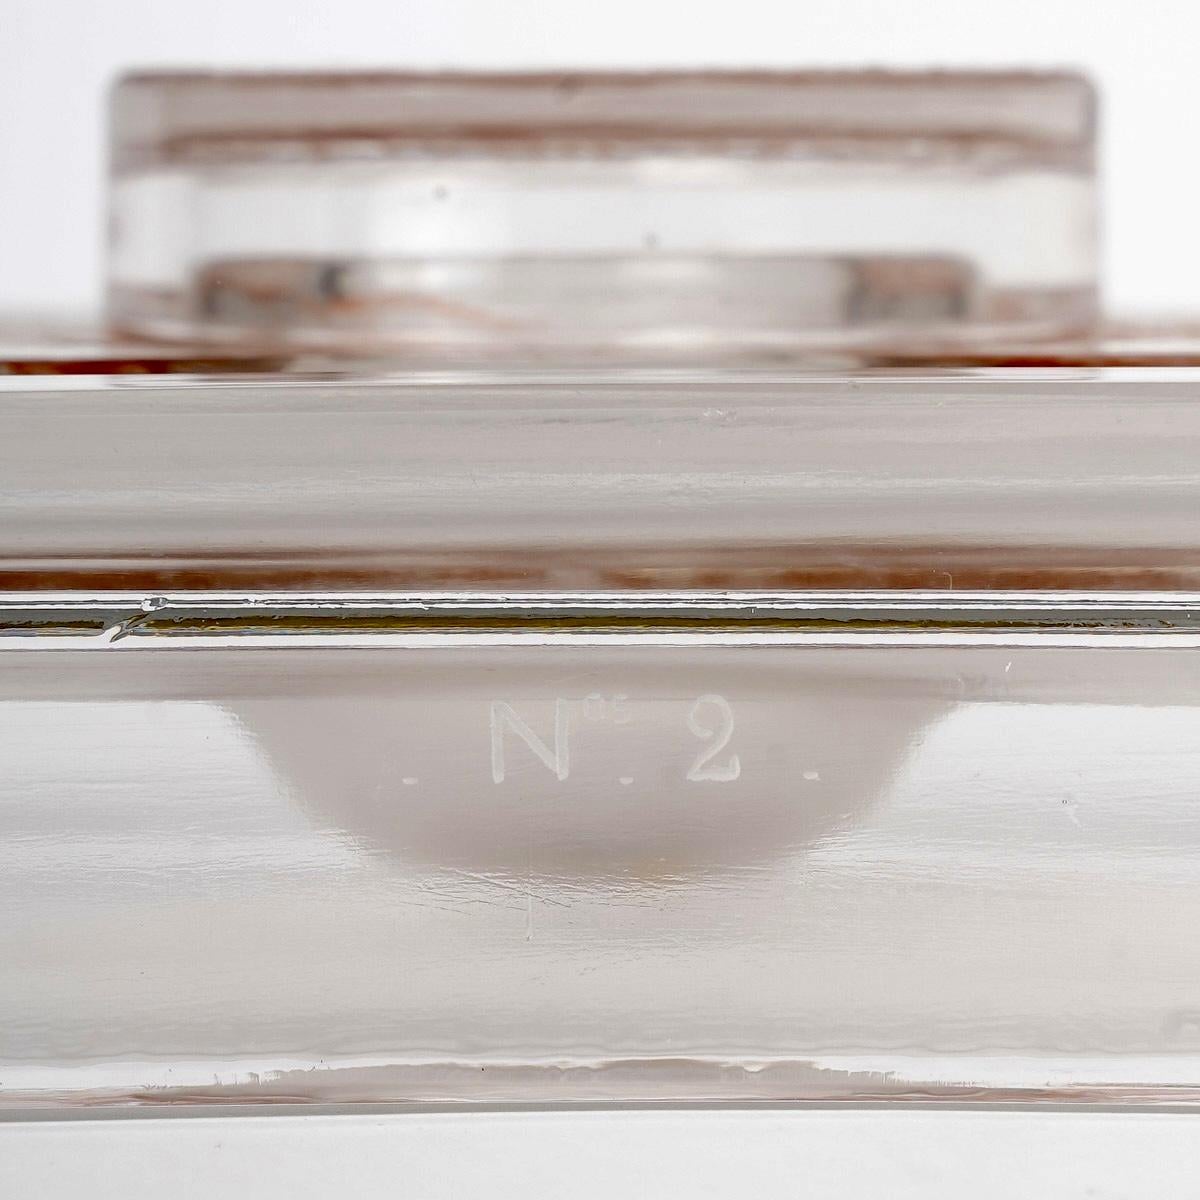 Early 20th Century 1924 René Lalique - Inkwell Colbert Glass With Sepia Patina - N°2/50 For Sale